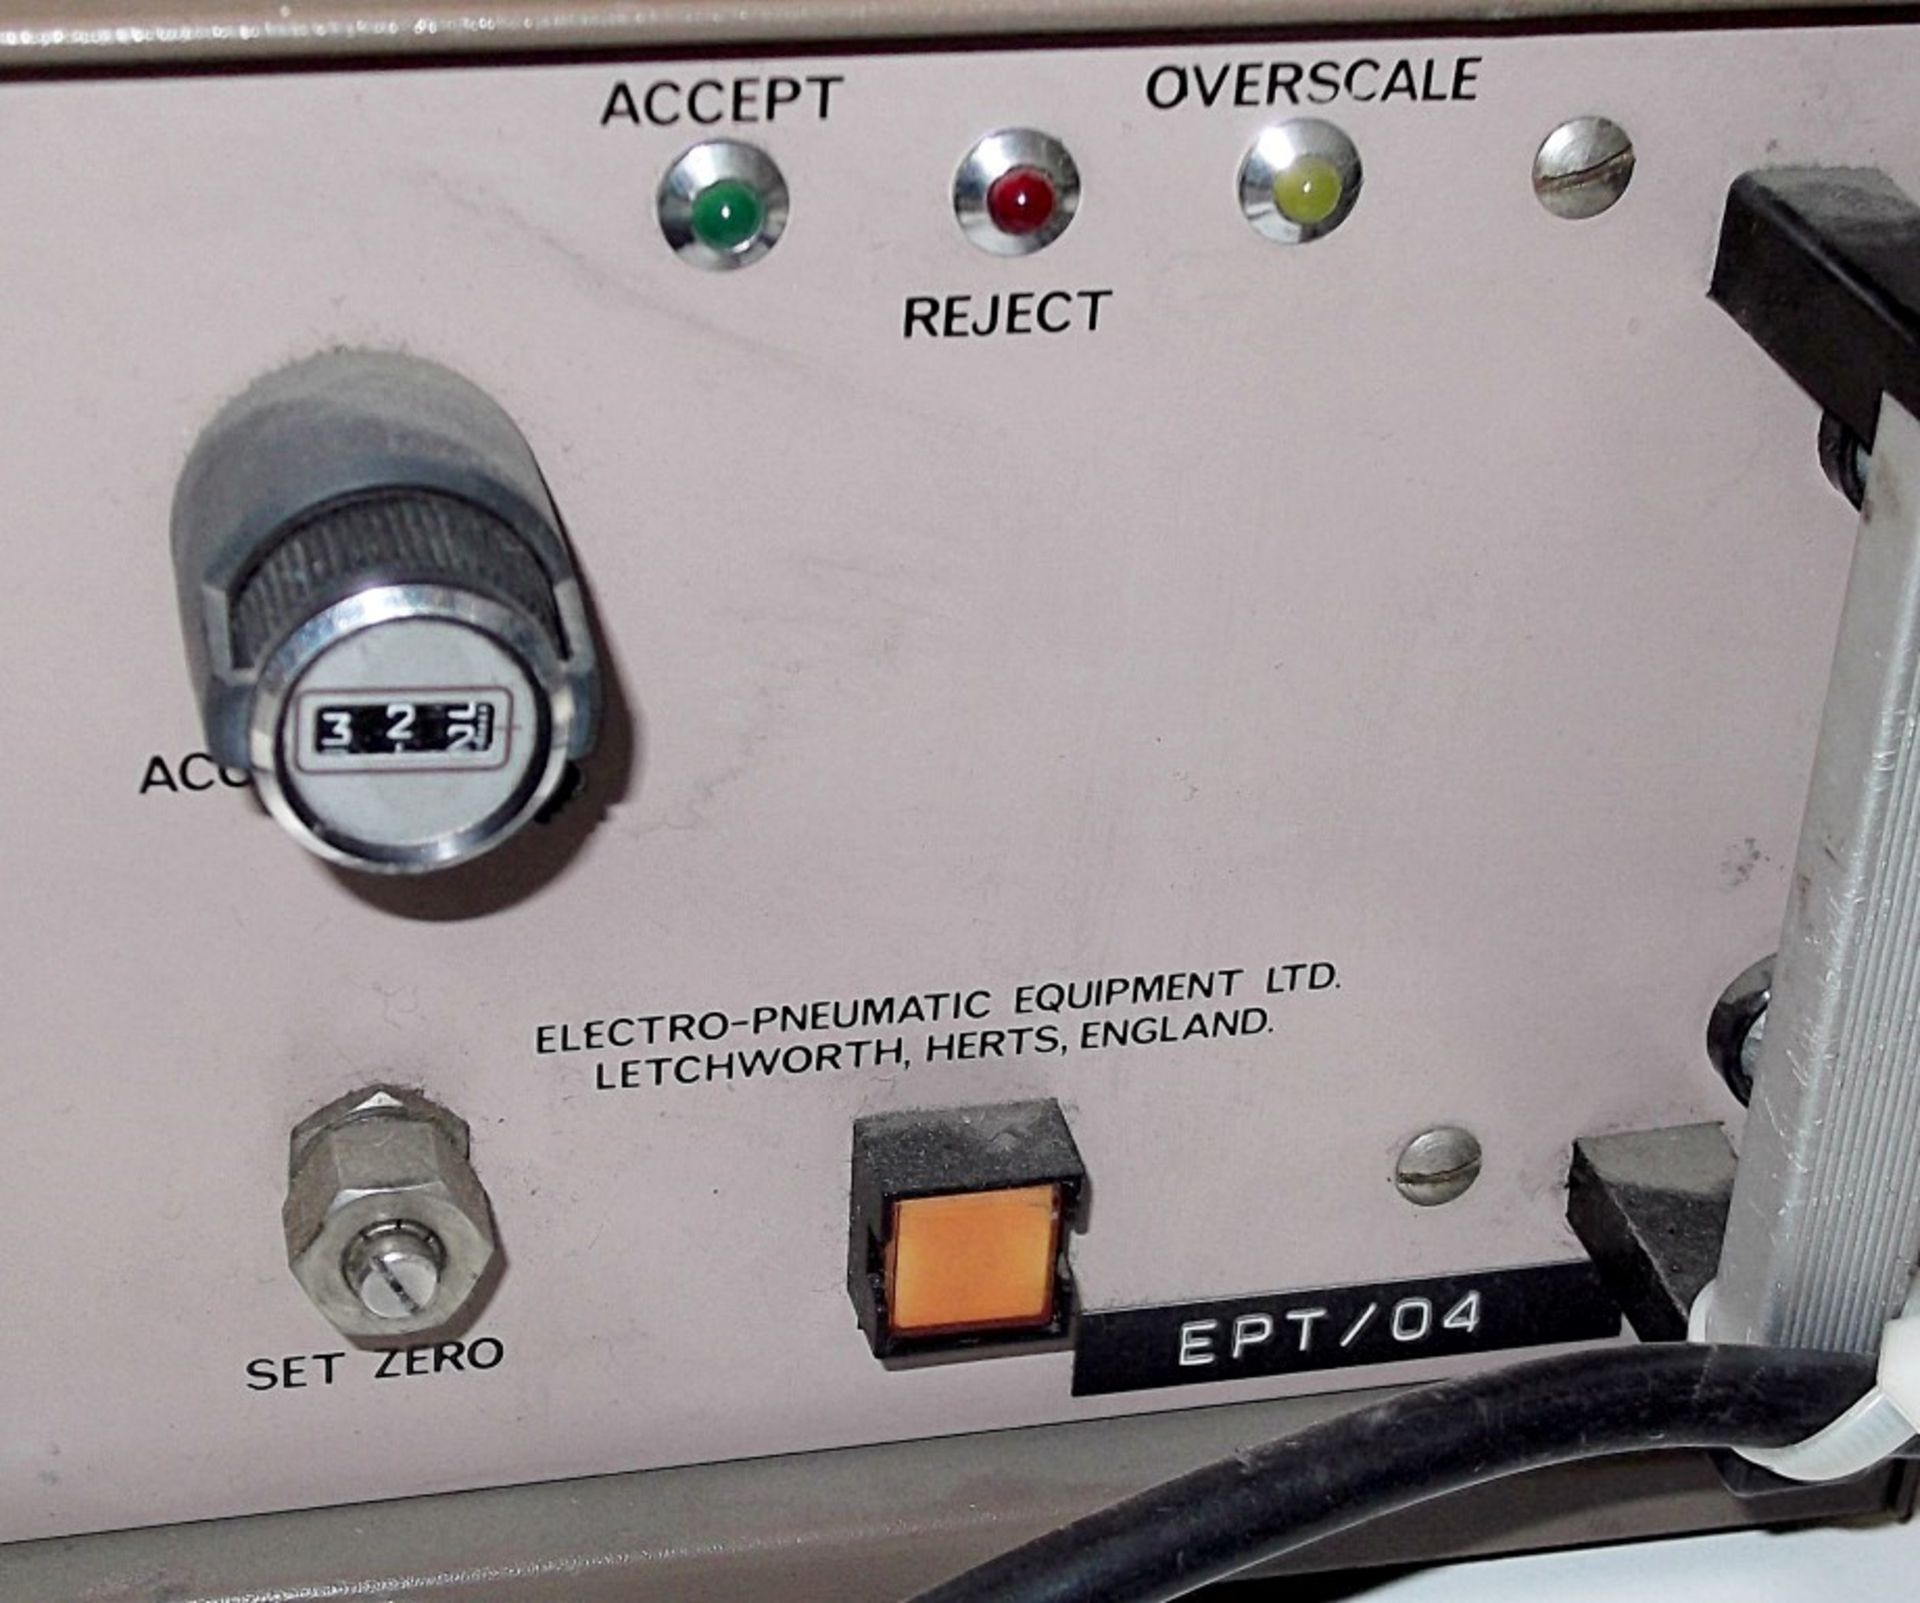 1 x Epetron EPE 200 Mk2 - REF: MIT53 - Used, Item Powers Up, No Further Tests Made - See Pictures - Image 3 of 5